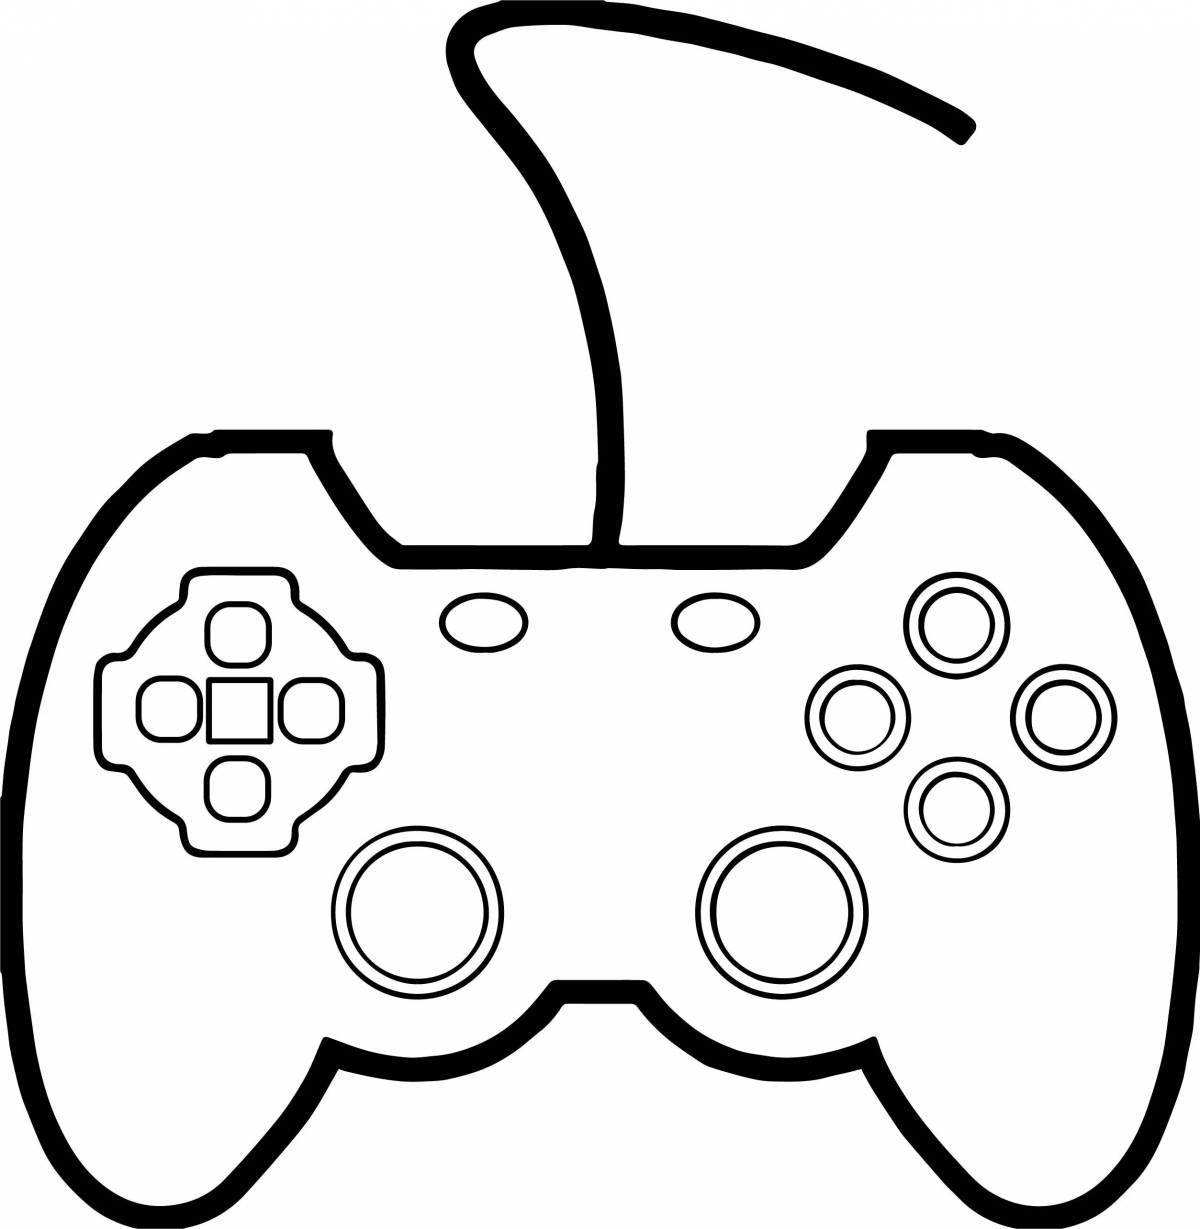 Exciting computer game coloring pages